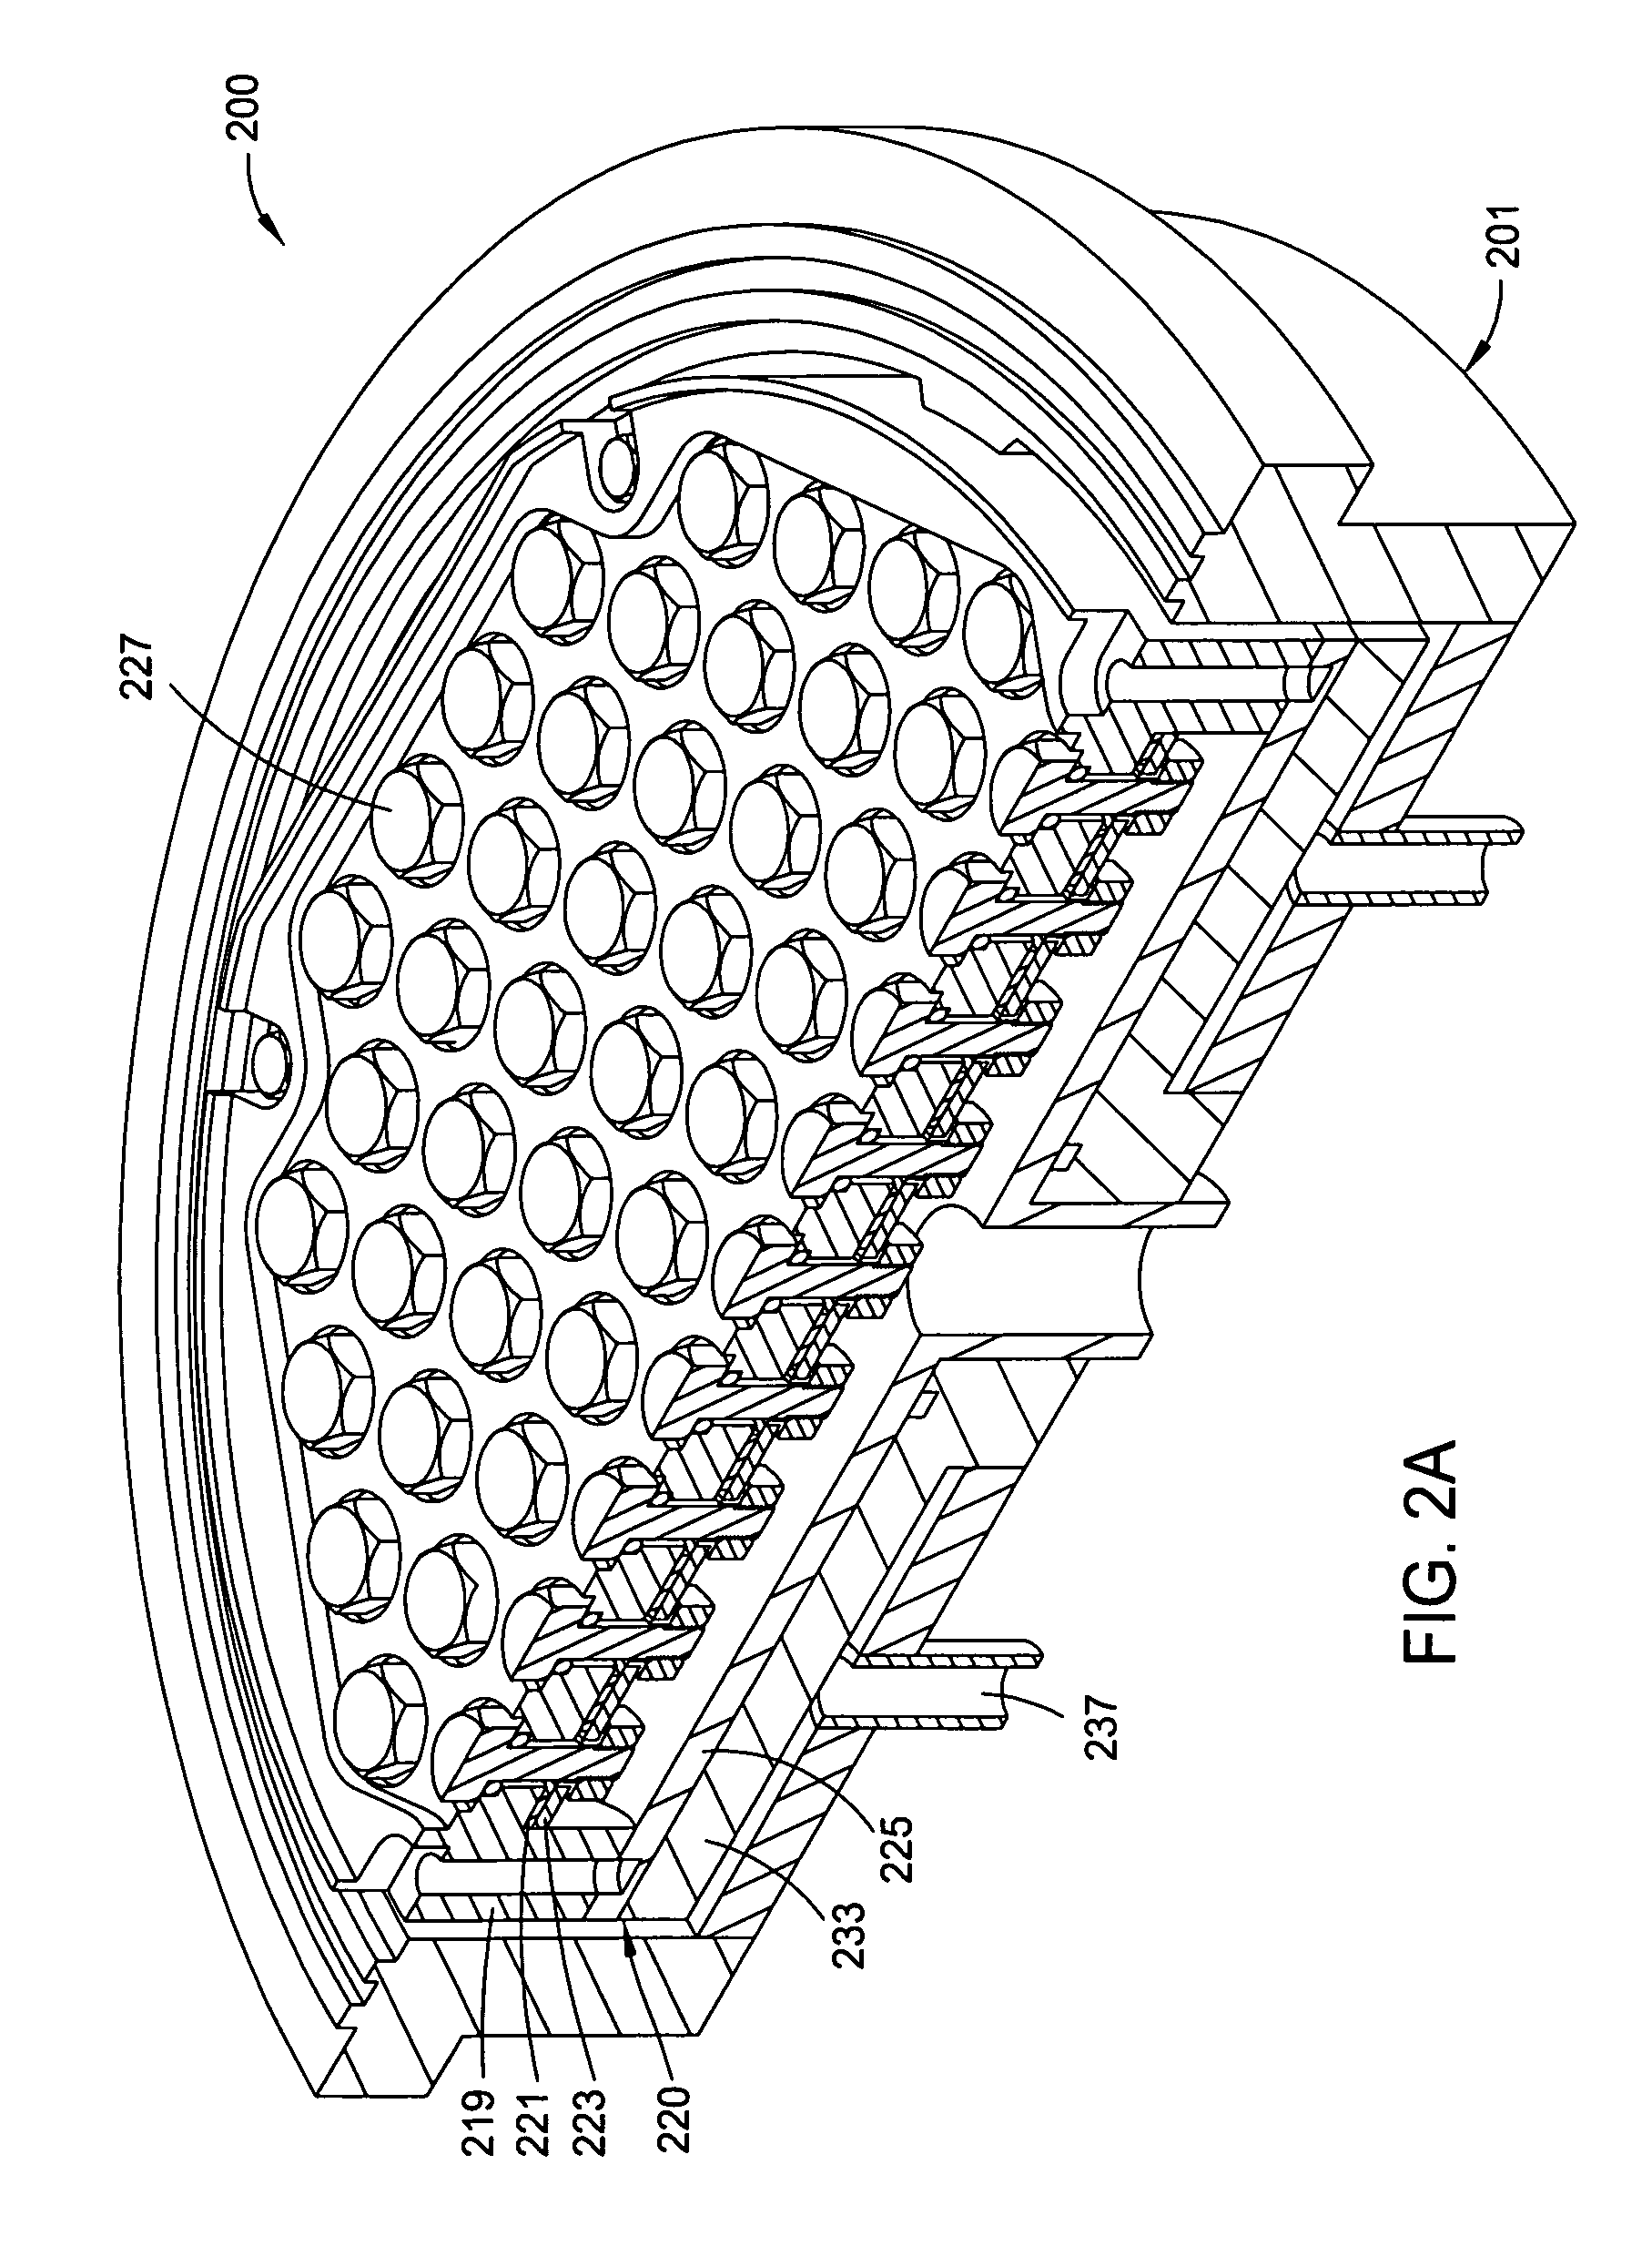 Electroplating apparatus and method based on an array of anodes